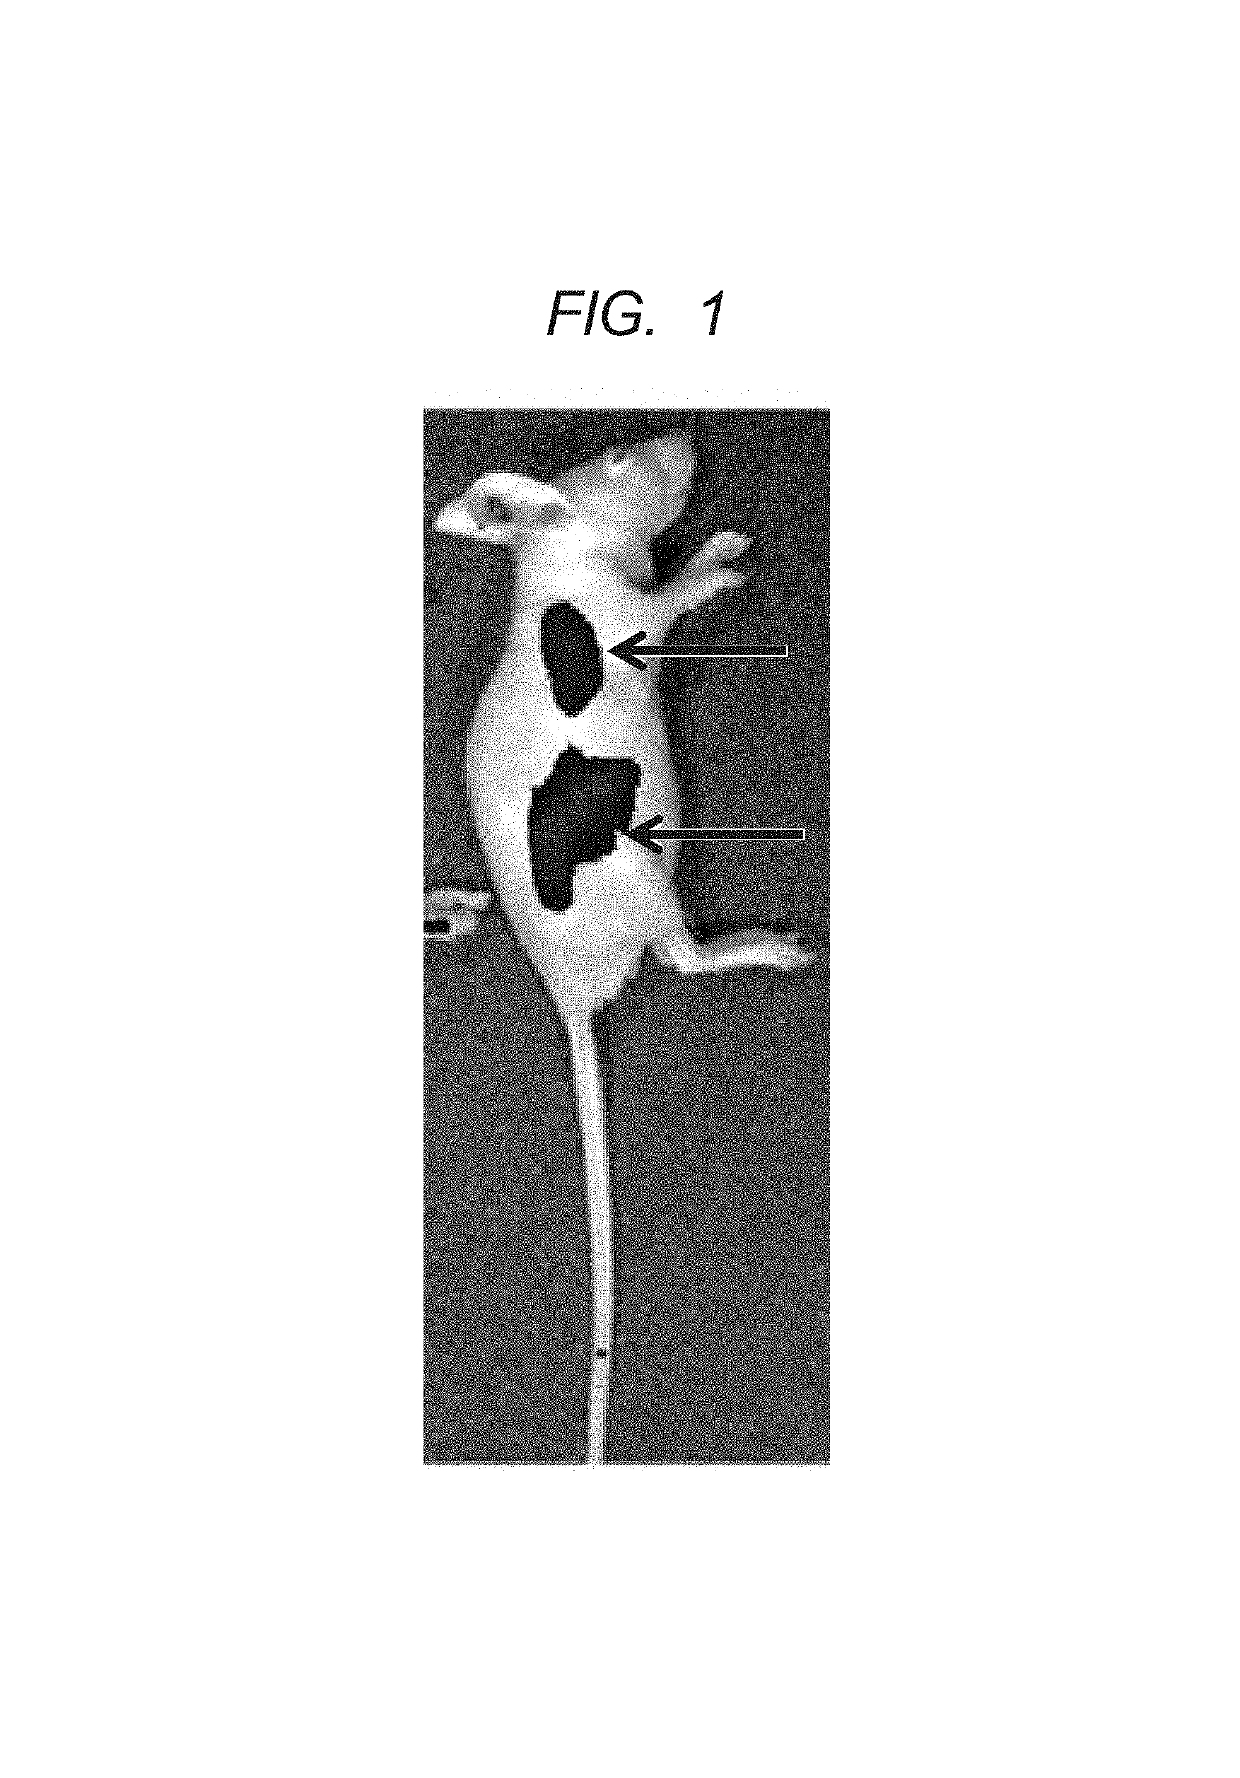 Polymer and contrast agent for photoacoustic imaging including the polymer